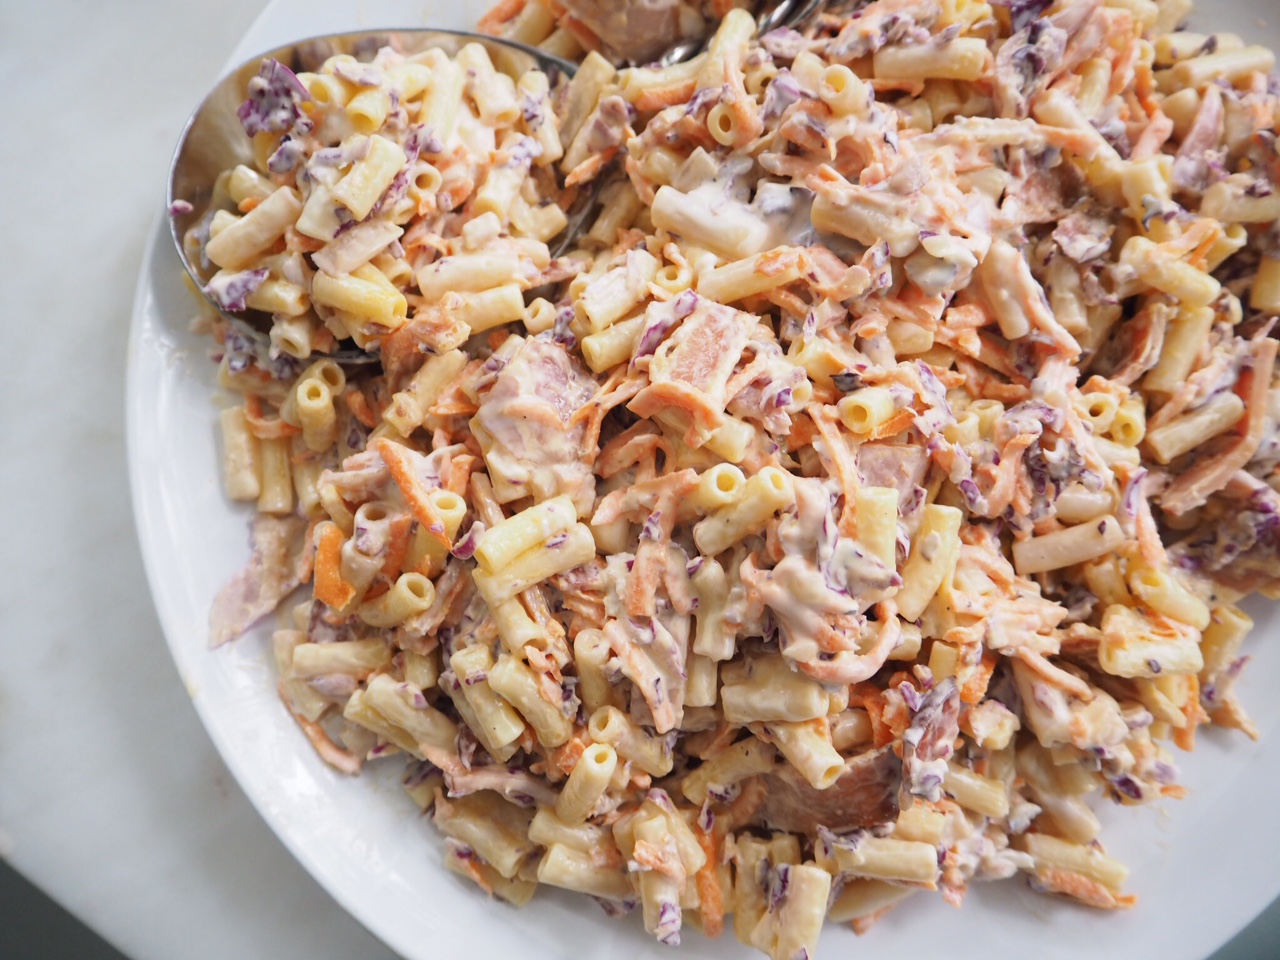 Bacon and Coleslaw Pasta Salad